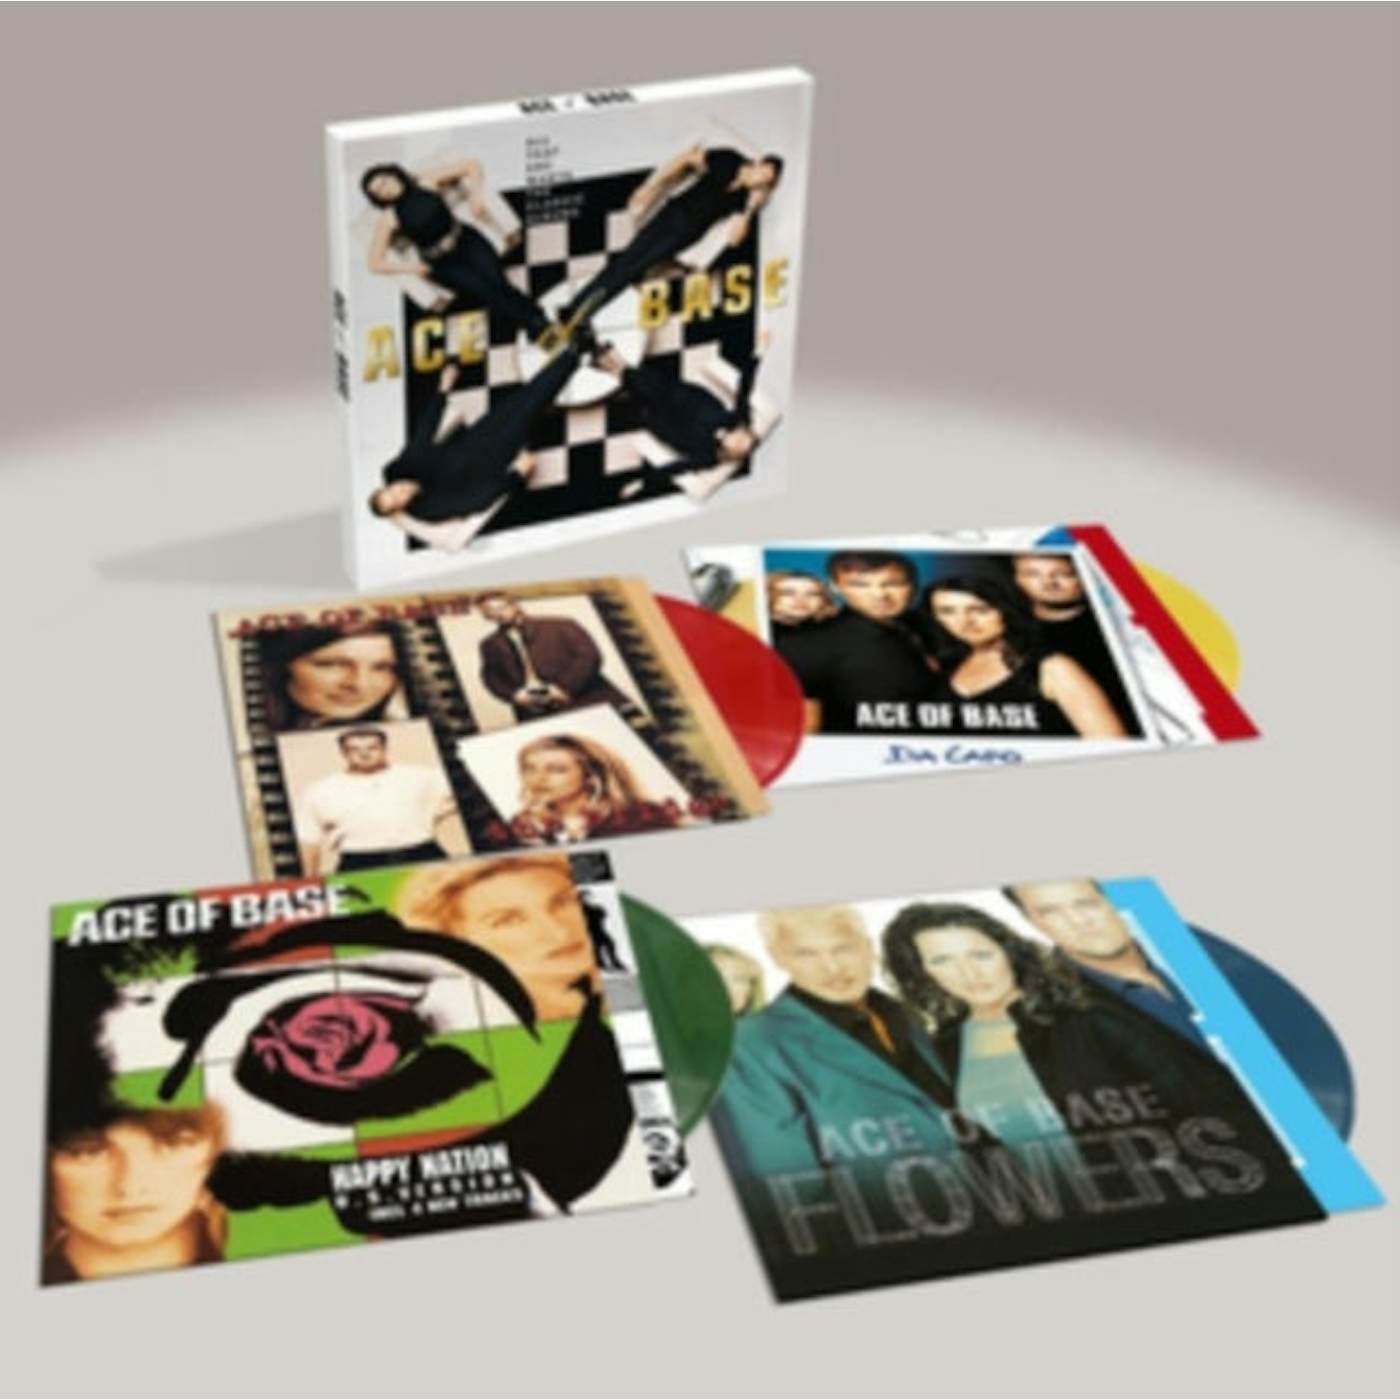 Ace Of Base LP Vinyl Record - All That She Wants - The Classic Albums (Green/Red/Blue/Yellow Vinyl)